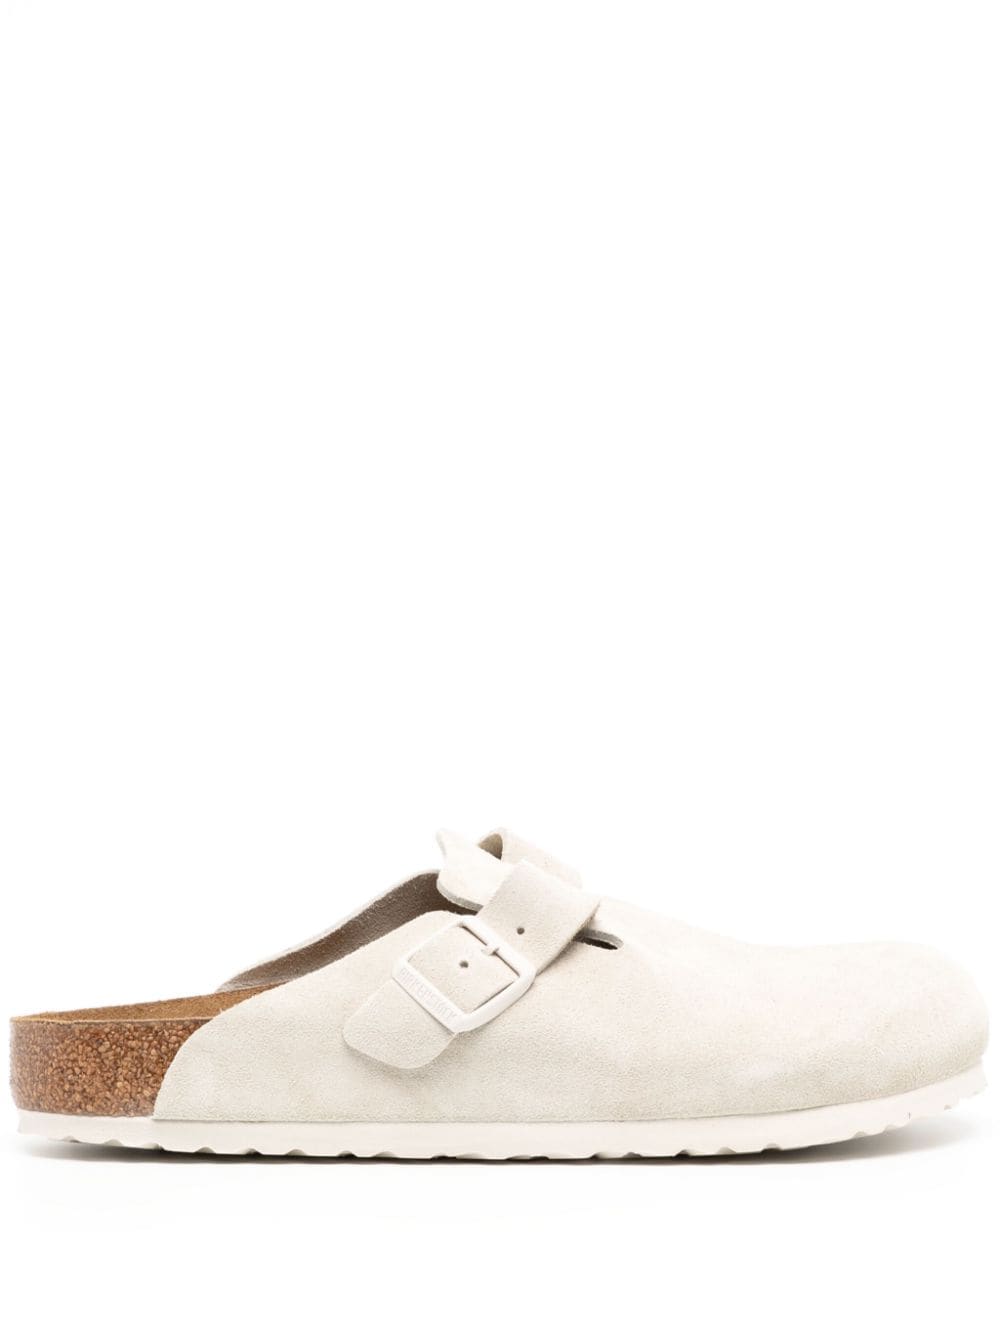 Birkenstock Buckled Suede Leather Slippers In White